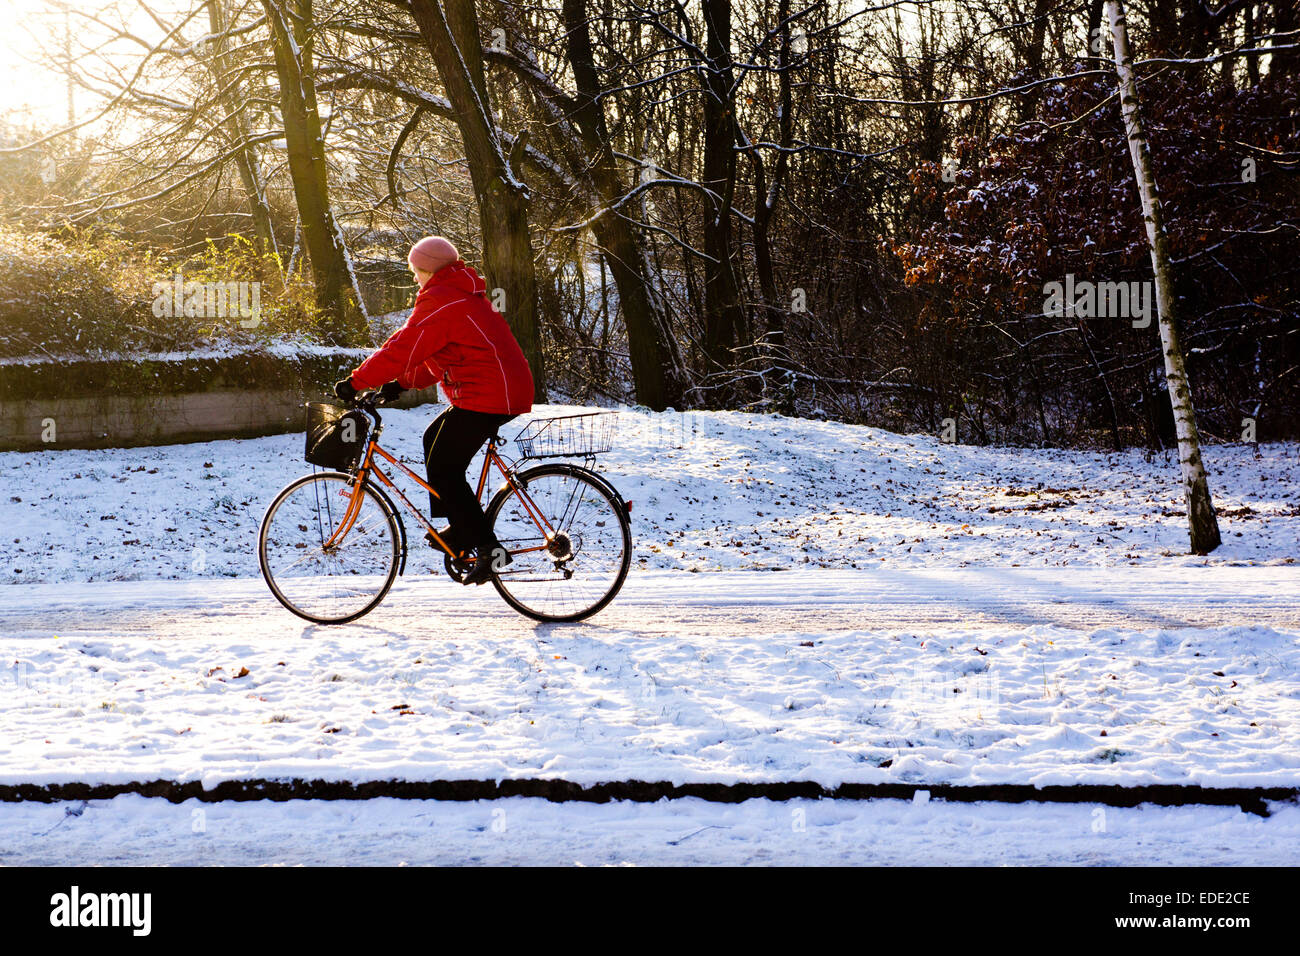 woman riding a bicycle in snow Stock Photo